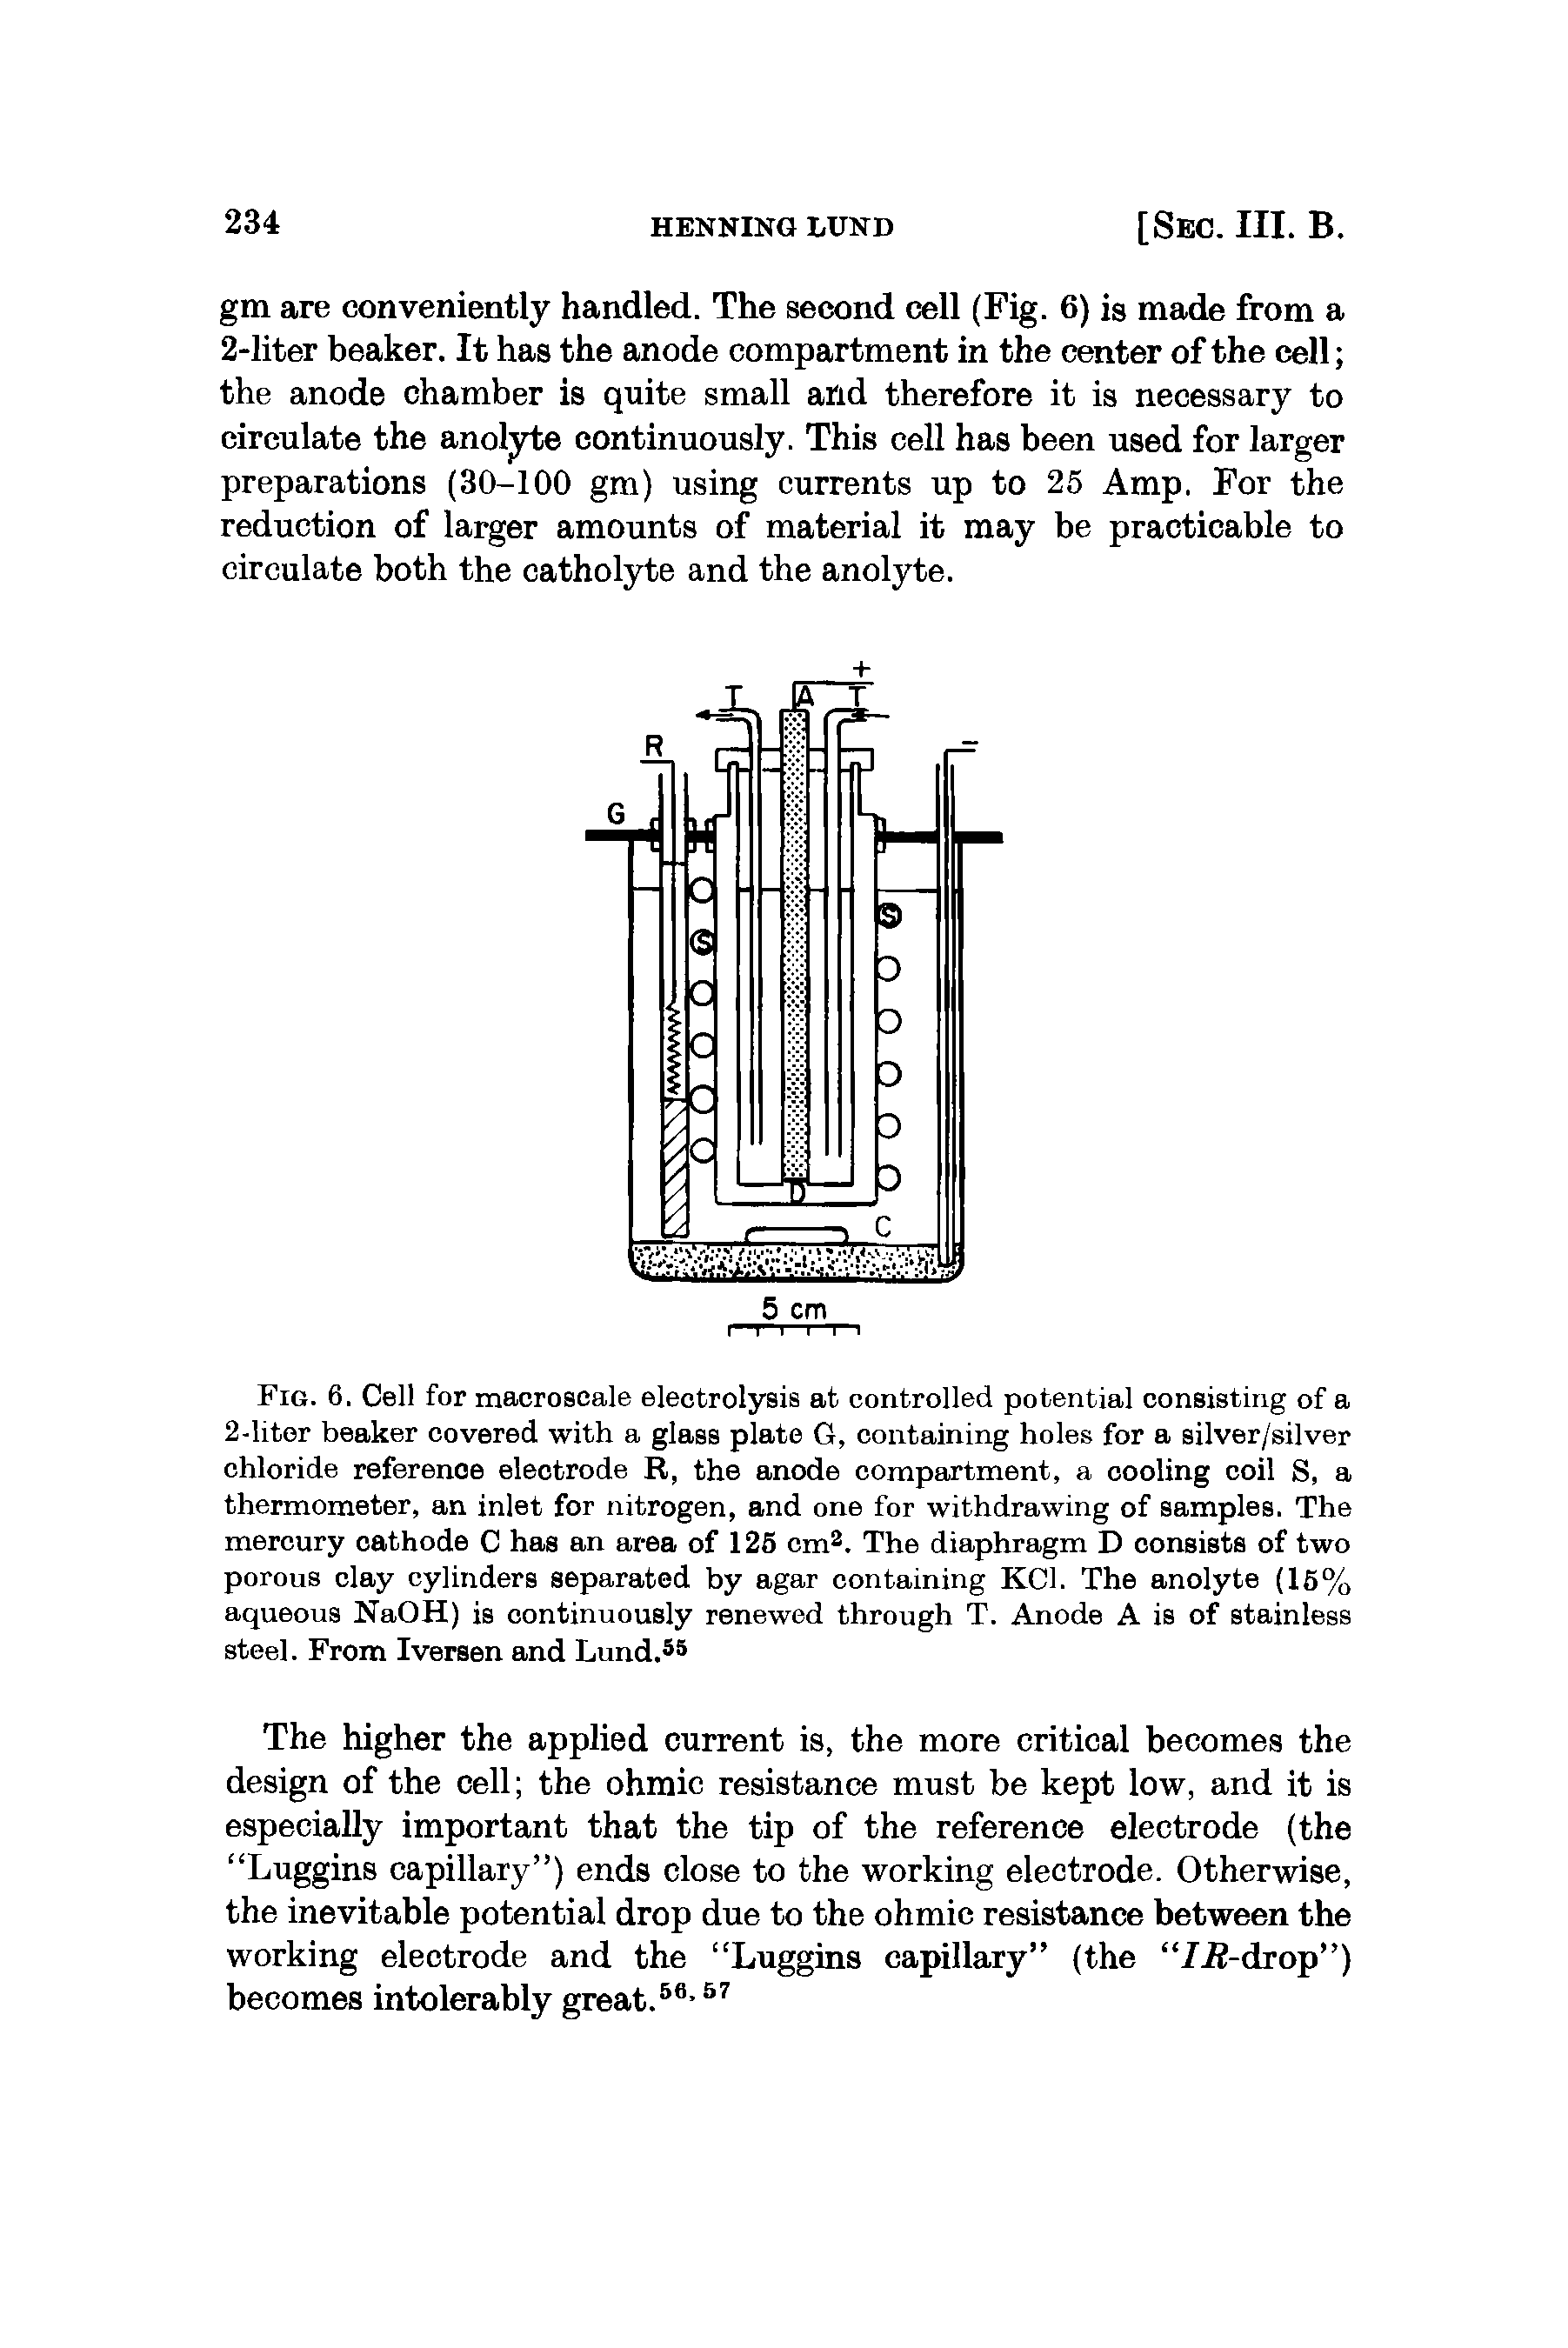 Fig. 6. Cell for macroscale electrolysis at controlled potential consisting of a 2-liter beaker covered with a glass plate G, containing holes for a silver/silver chloride referenoe electrode R, the anode compartment, a cooling coil S, a thermometer, an inlet for nitrogen, and one for withdrawing of samples. The mercury cathode C has an area of 125 cm2. The diaphragm D consists of two porous clay cylinders separated by agar containing KC1. The anolyte (15% aqueous NaOH) is continuously renewed through T. Anode A is of stainless steel. From Iversen and Lund.55...